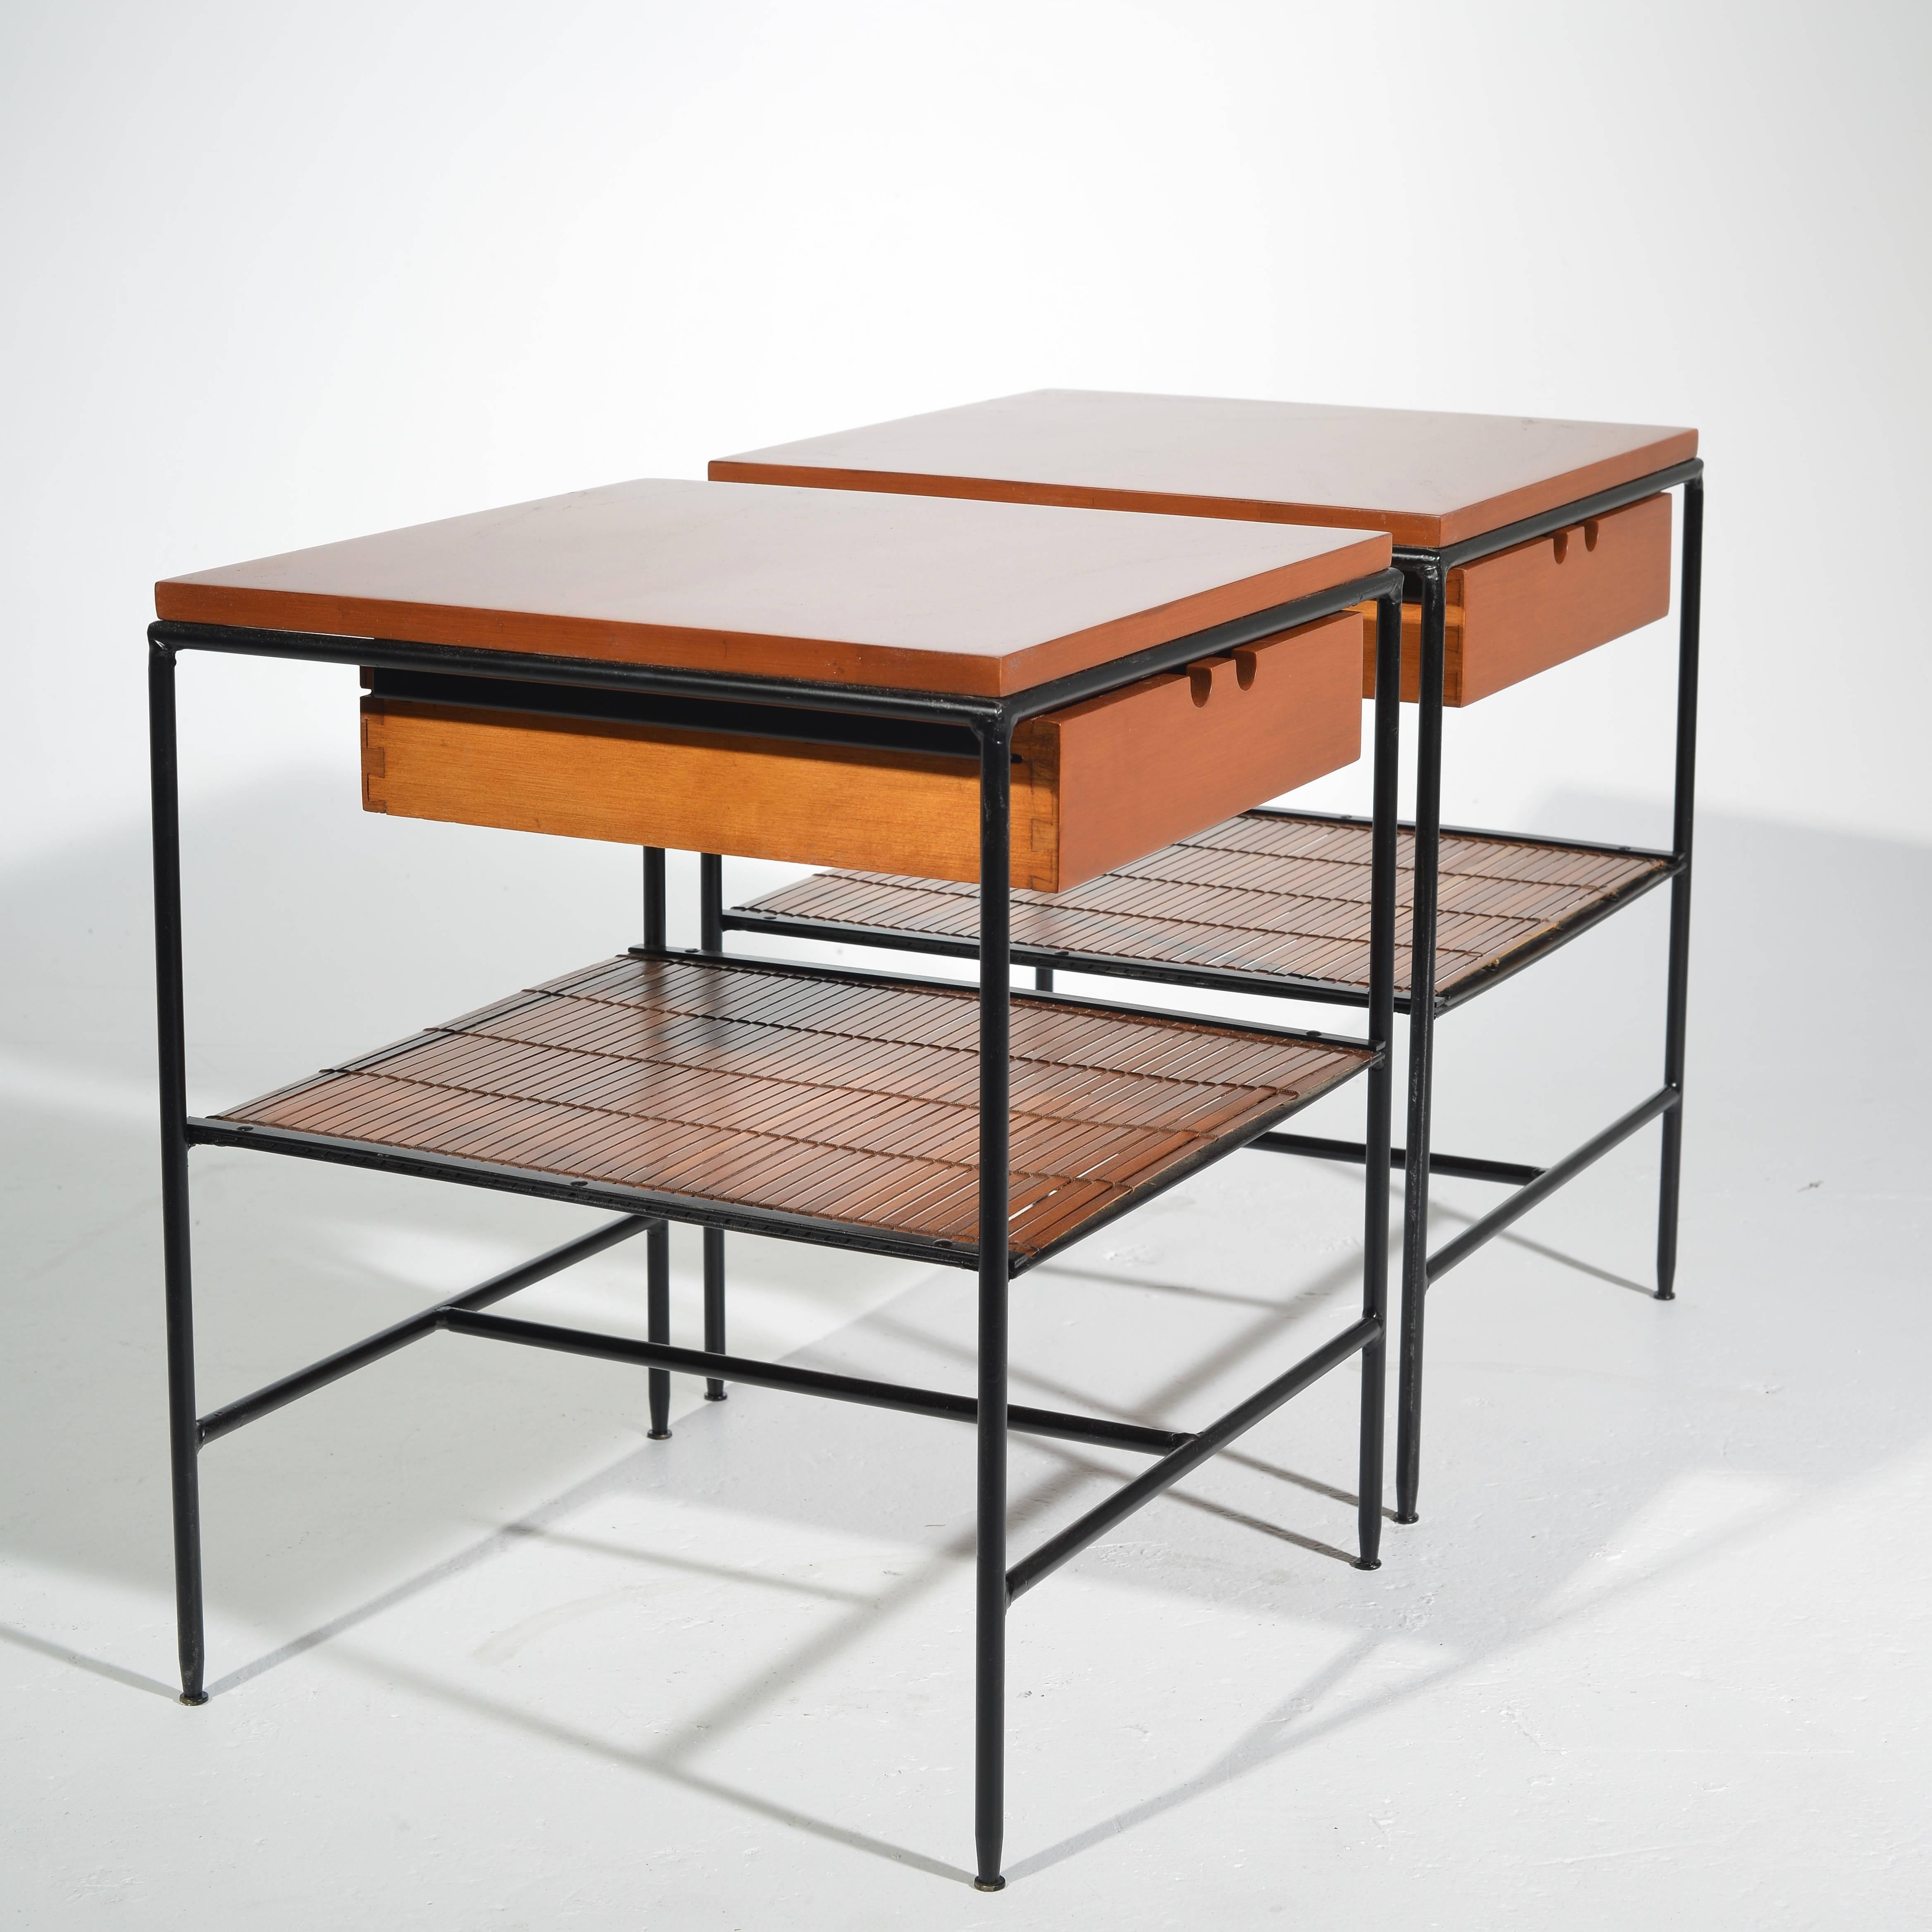 Mid-20th Century Rare Bamboo and Birch Nightstands by Paul McCobb for Planner Group